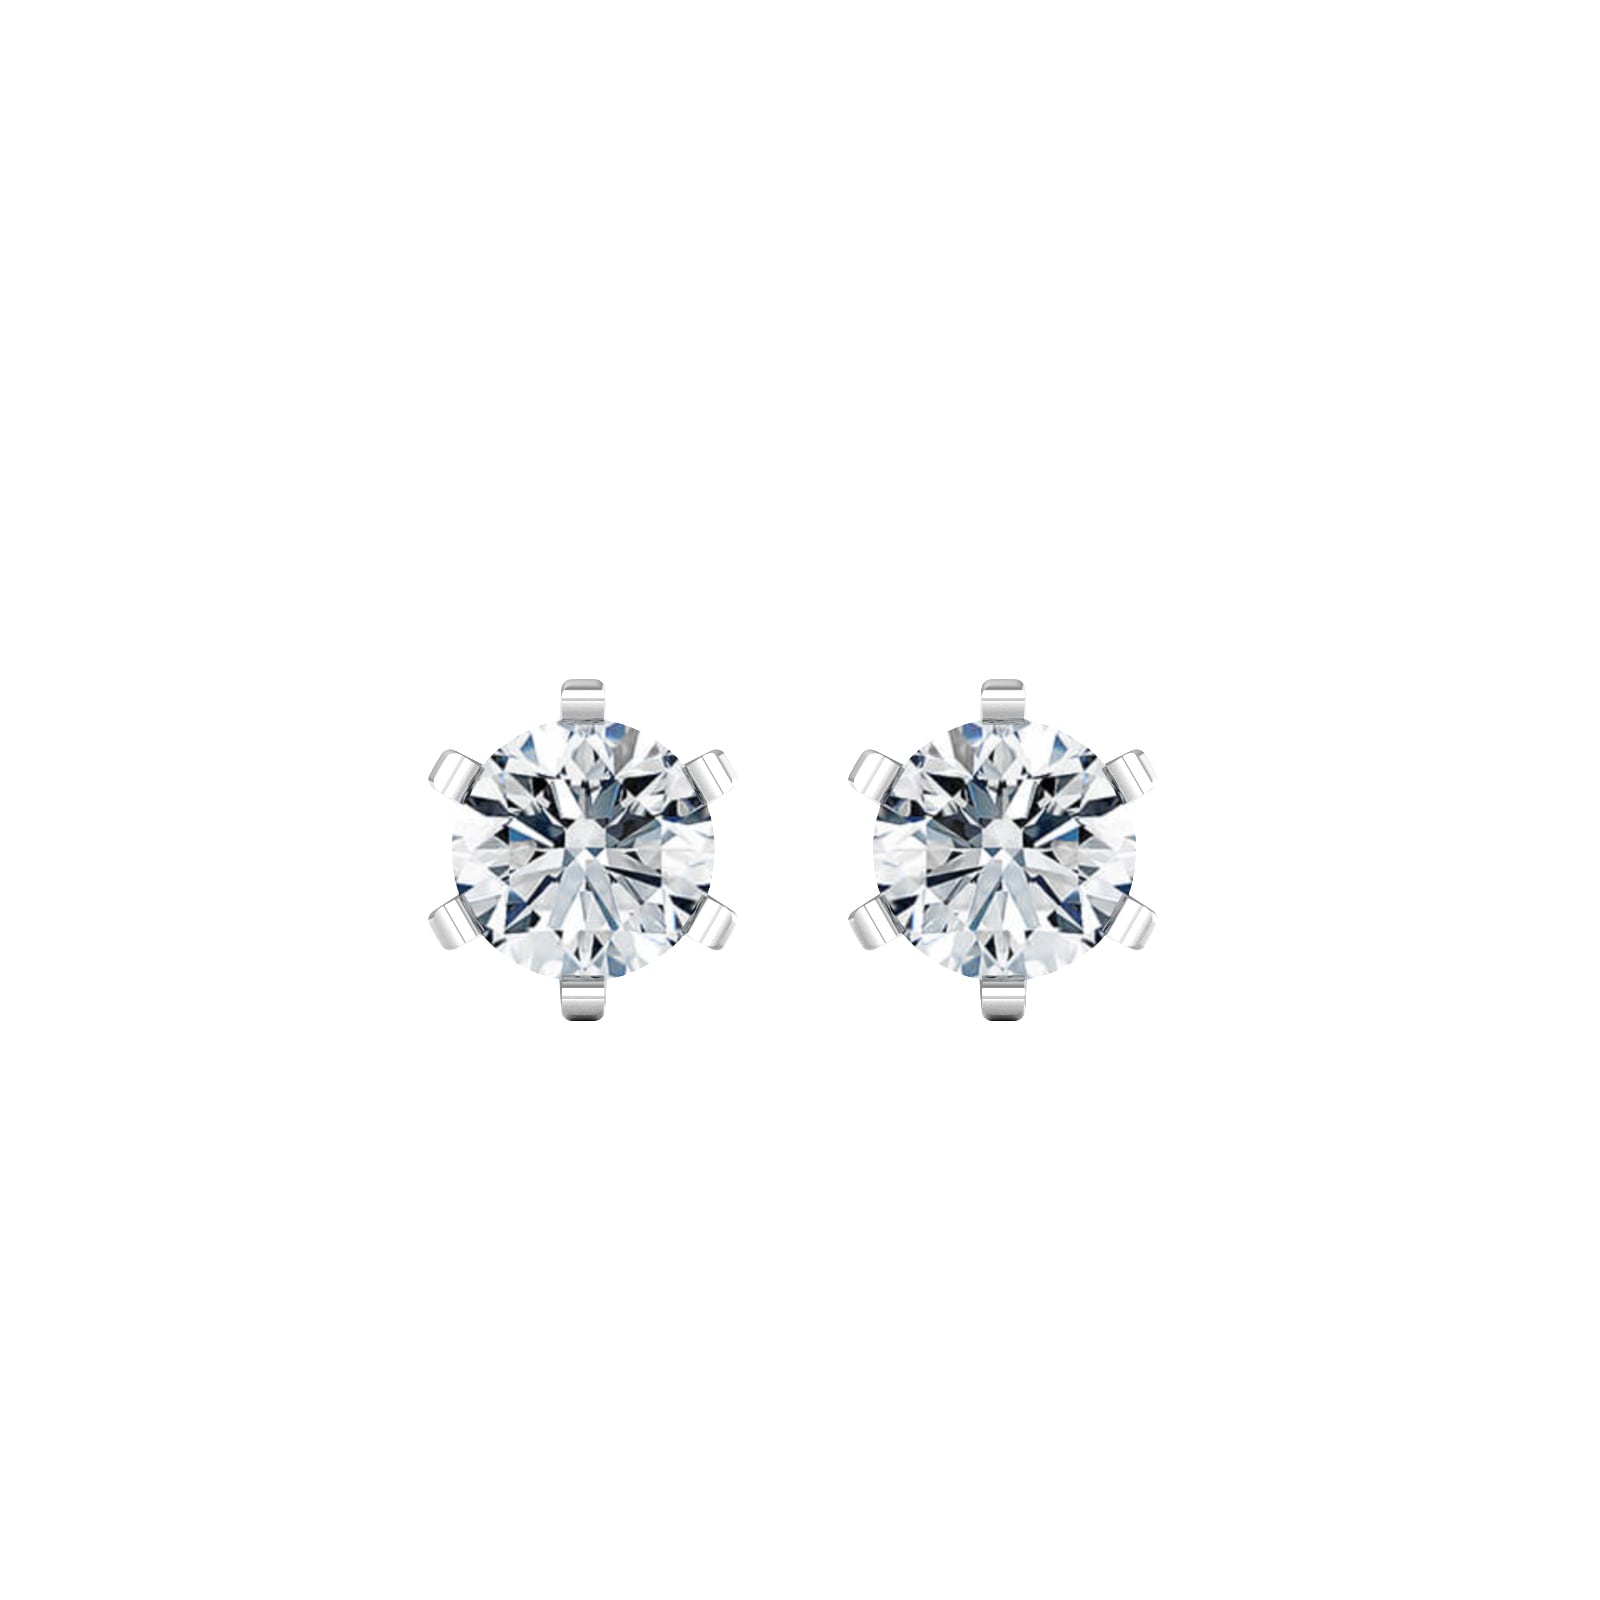 18ct White Gold 0.50cttw Solitaire Diamond Stud Earrings